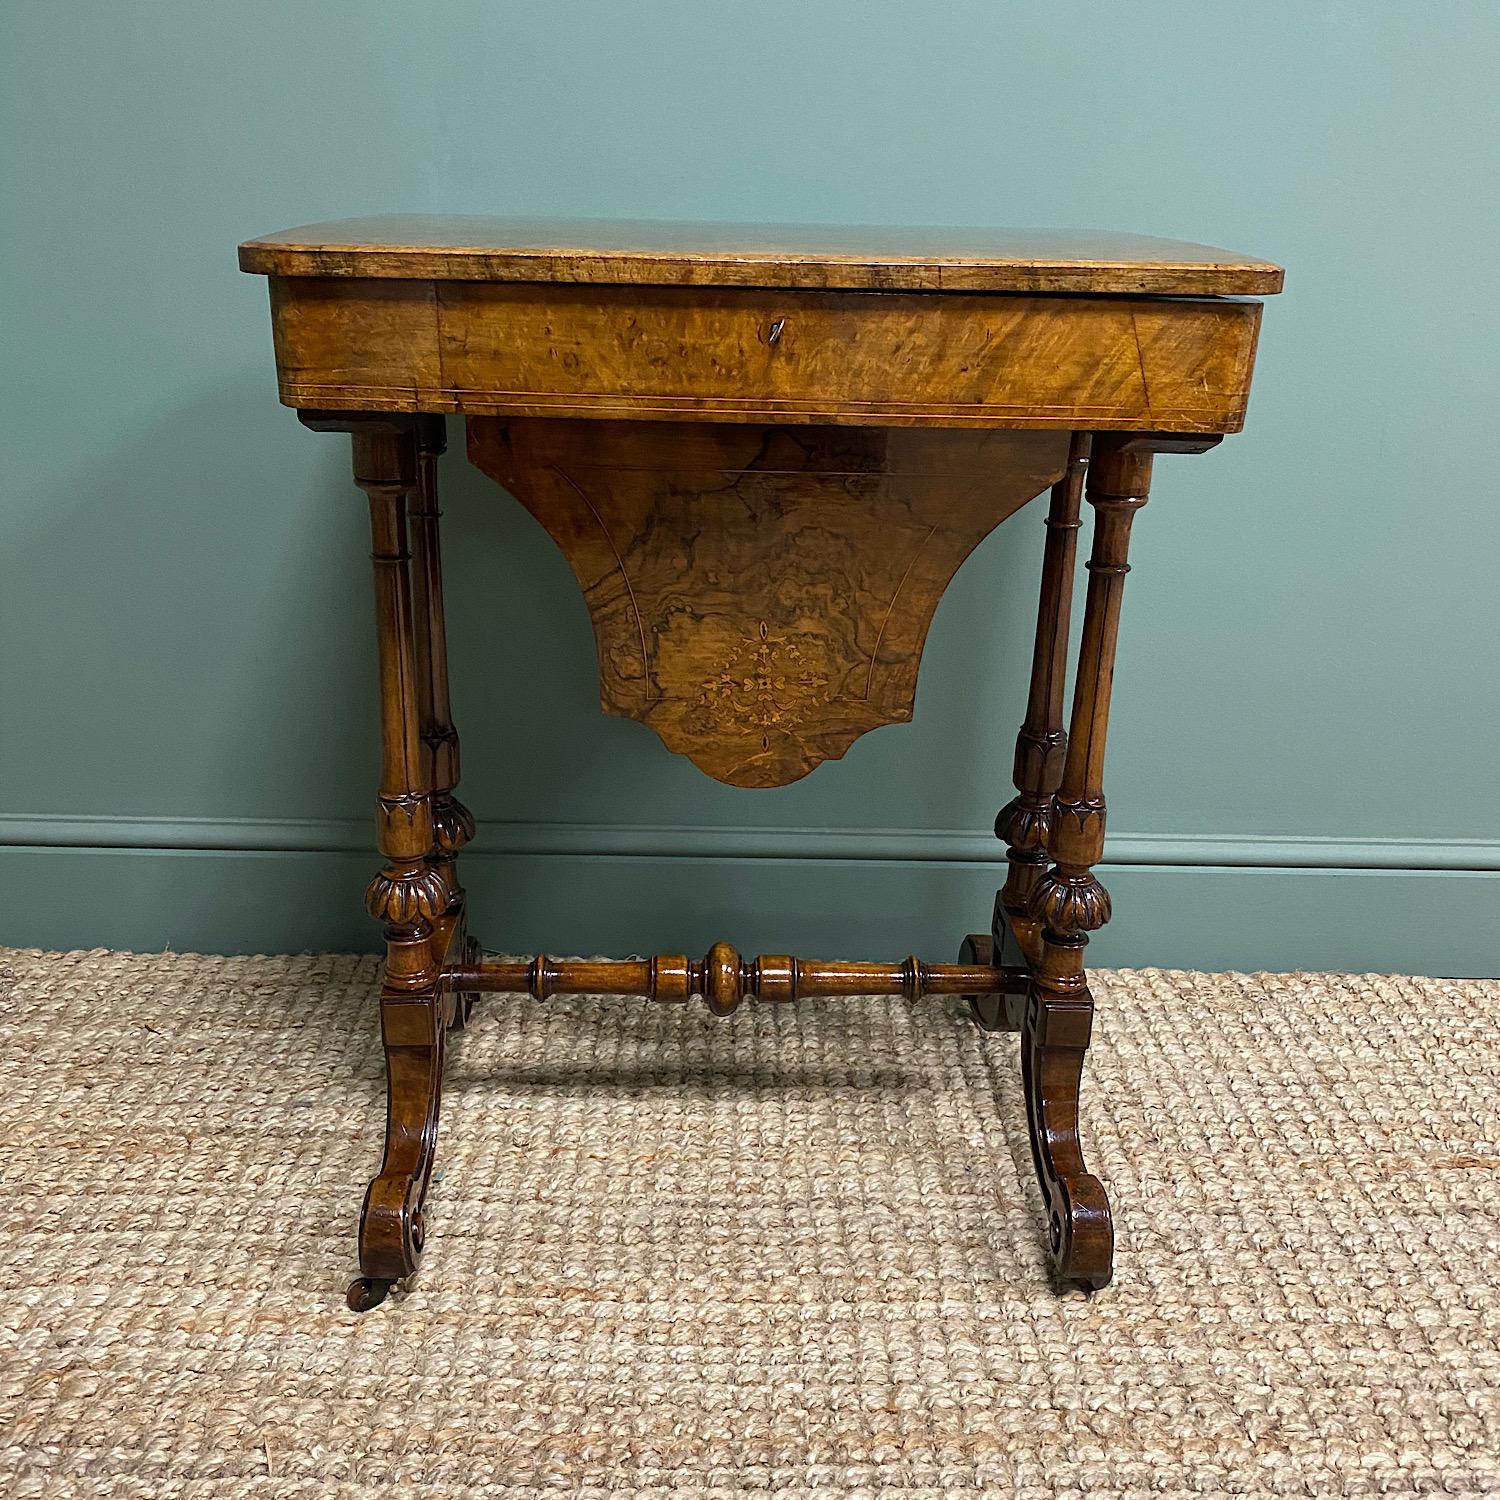 Spectacular Figured Walnut Inlaid Victorian Antique Work Box / Side Table

This Spectacular 19th Century Figured Walnut Inlaid Victorian Antique Work Box / Side Table dates from ca. 1870.  The top is beautifully figured with fine inlay and opens to